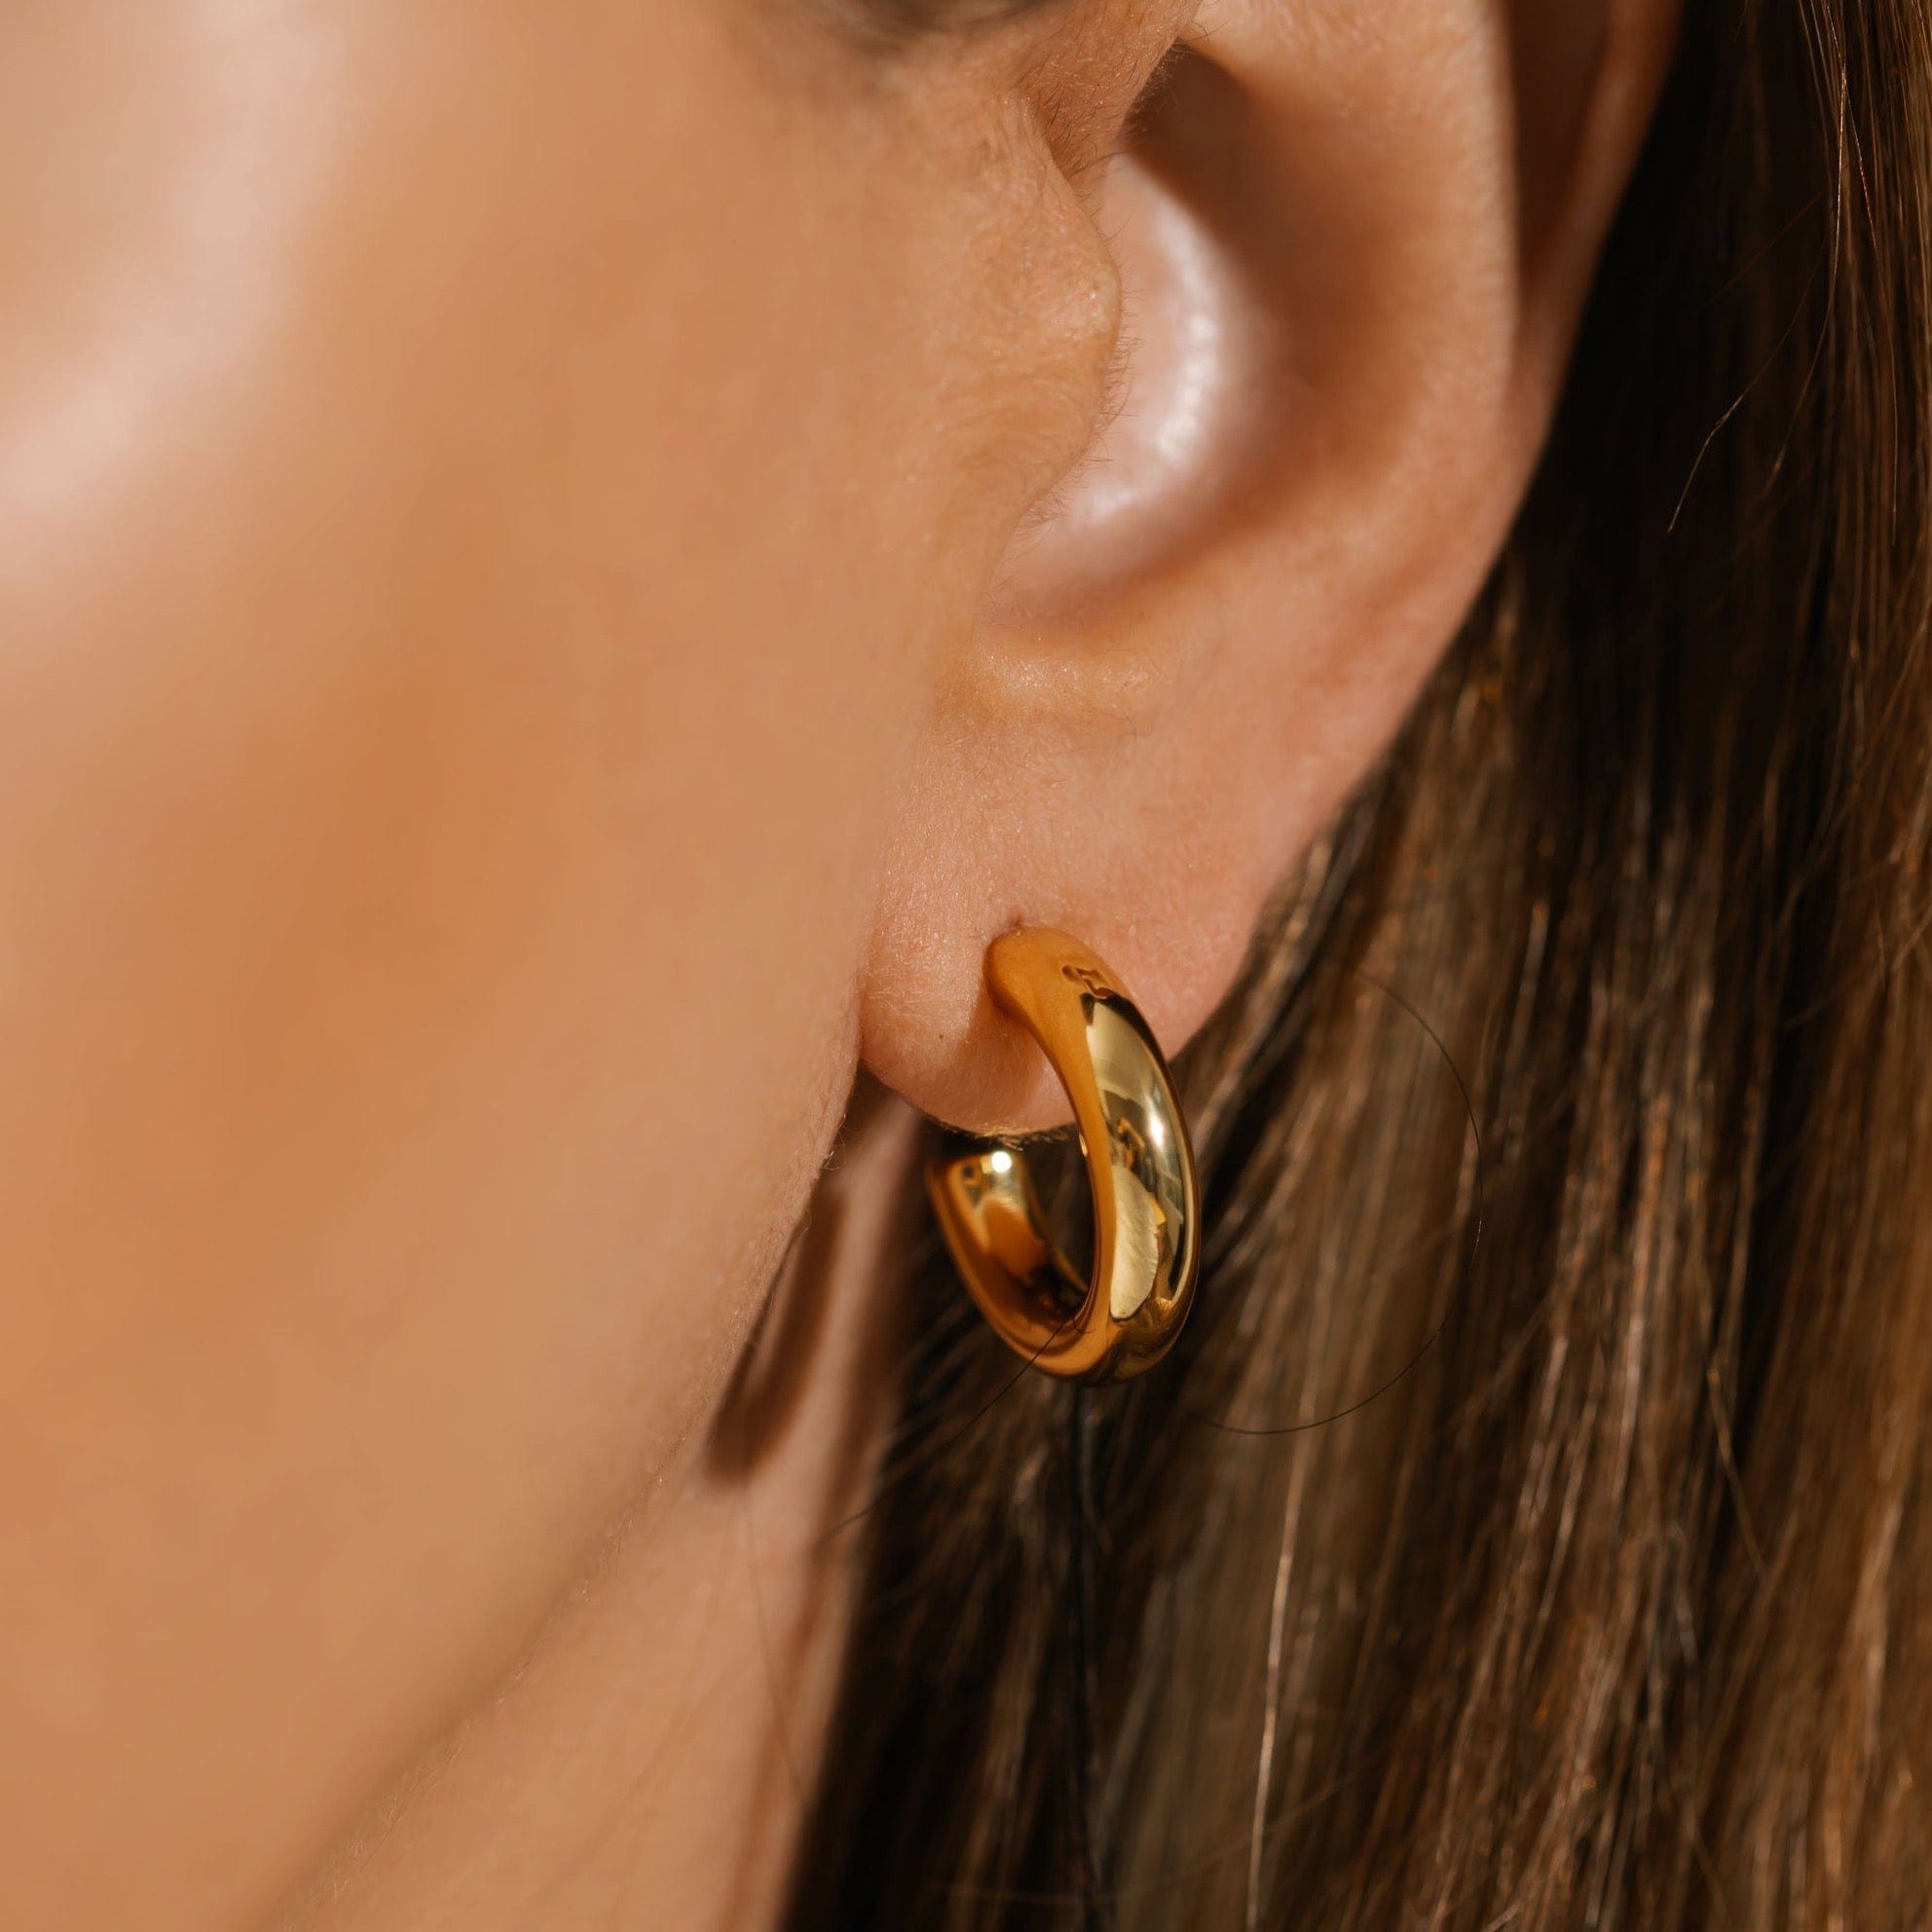 A close-up view of the Malta Hoop 20mm on the model's ear shows the open hoop design and the gleaming, golden surface reflecting the surroundings. 